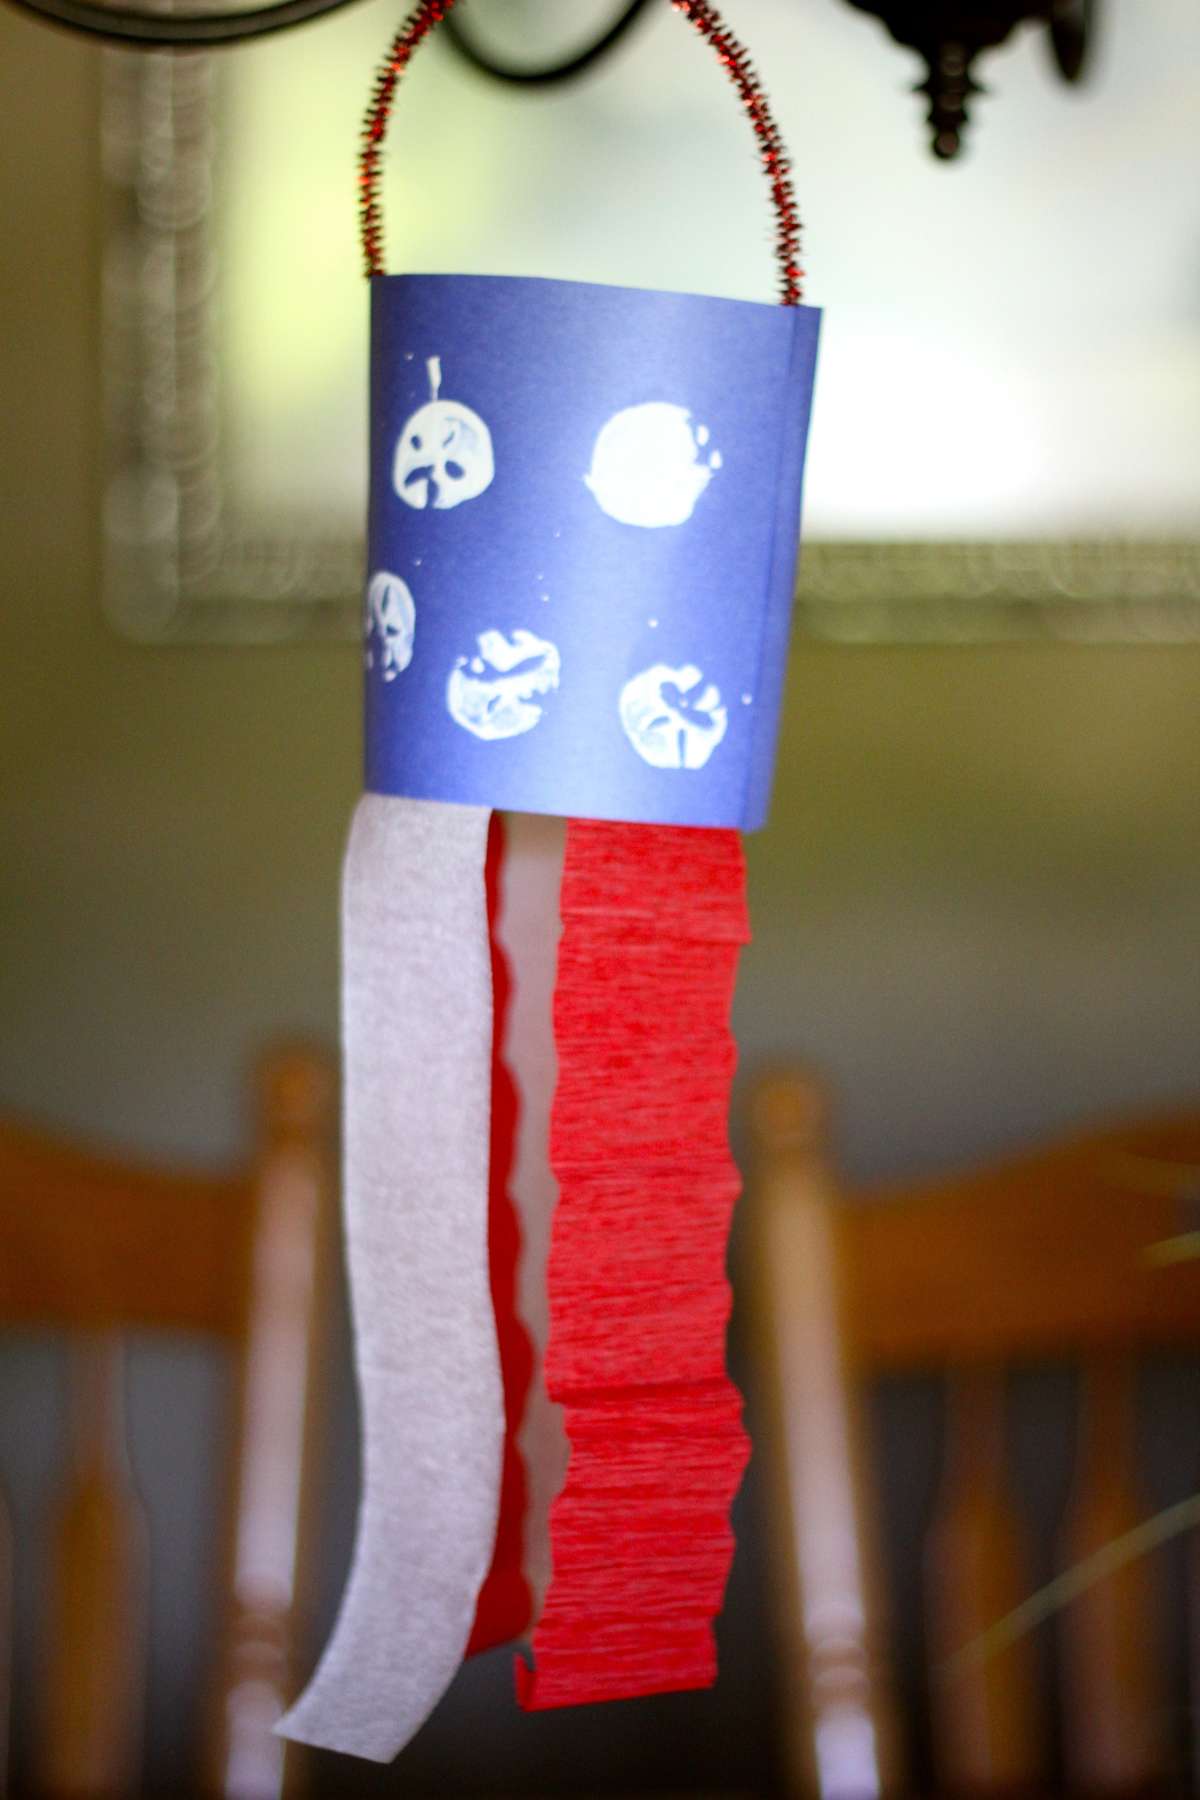 Easy Fourth of July crafts